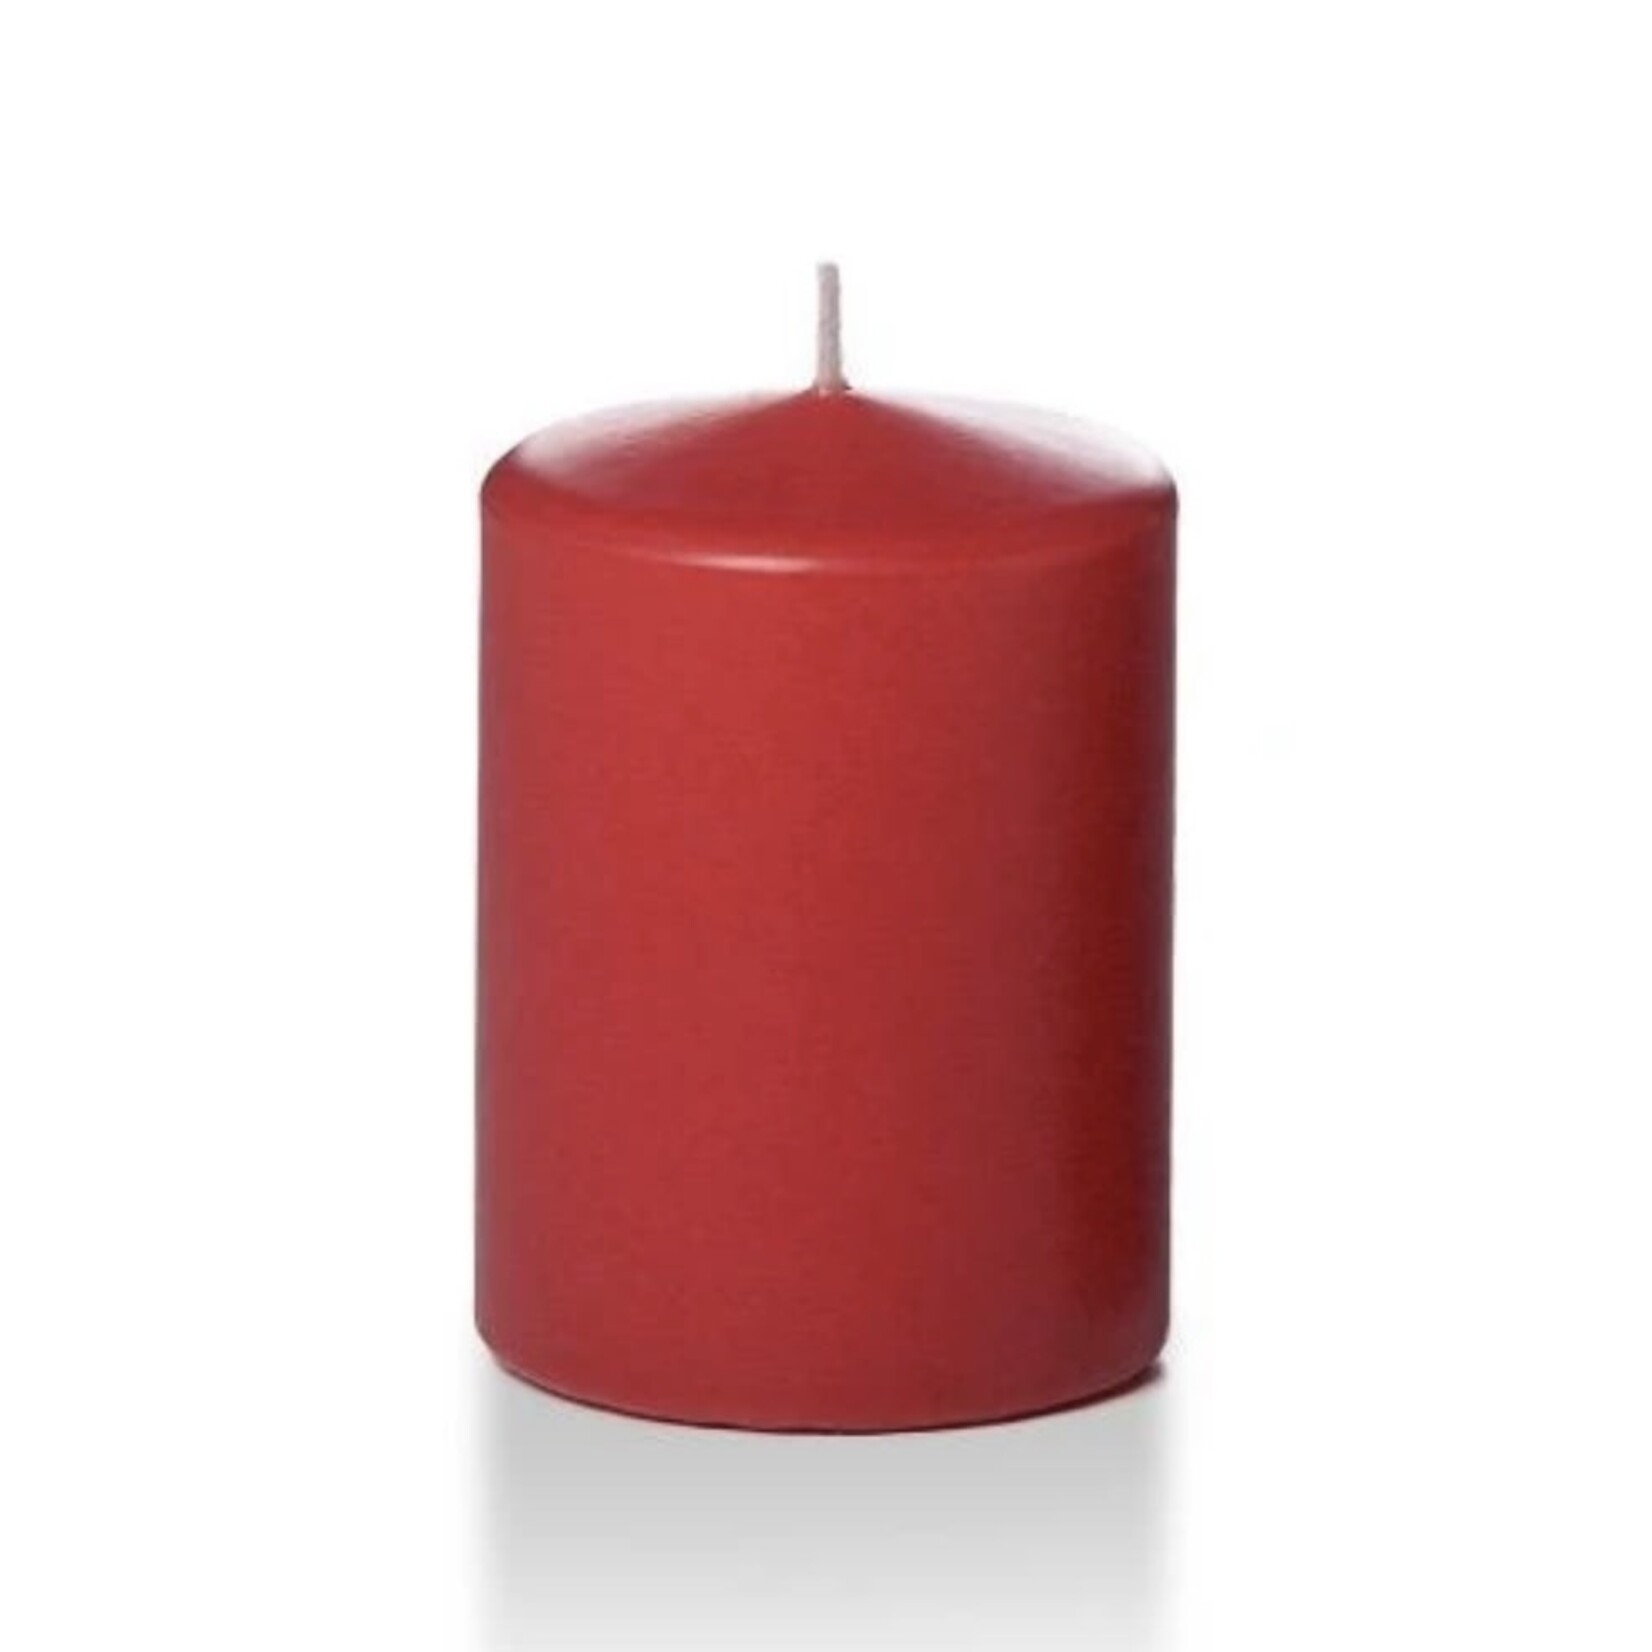 Darice Red Wax Candle